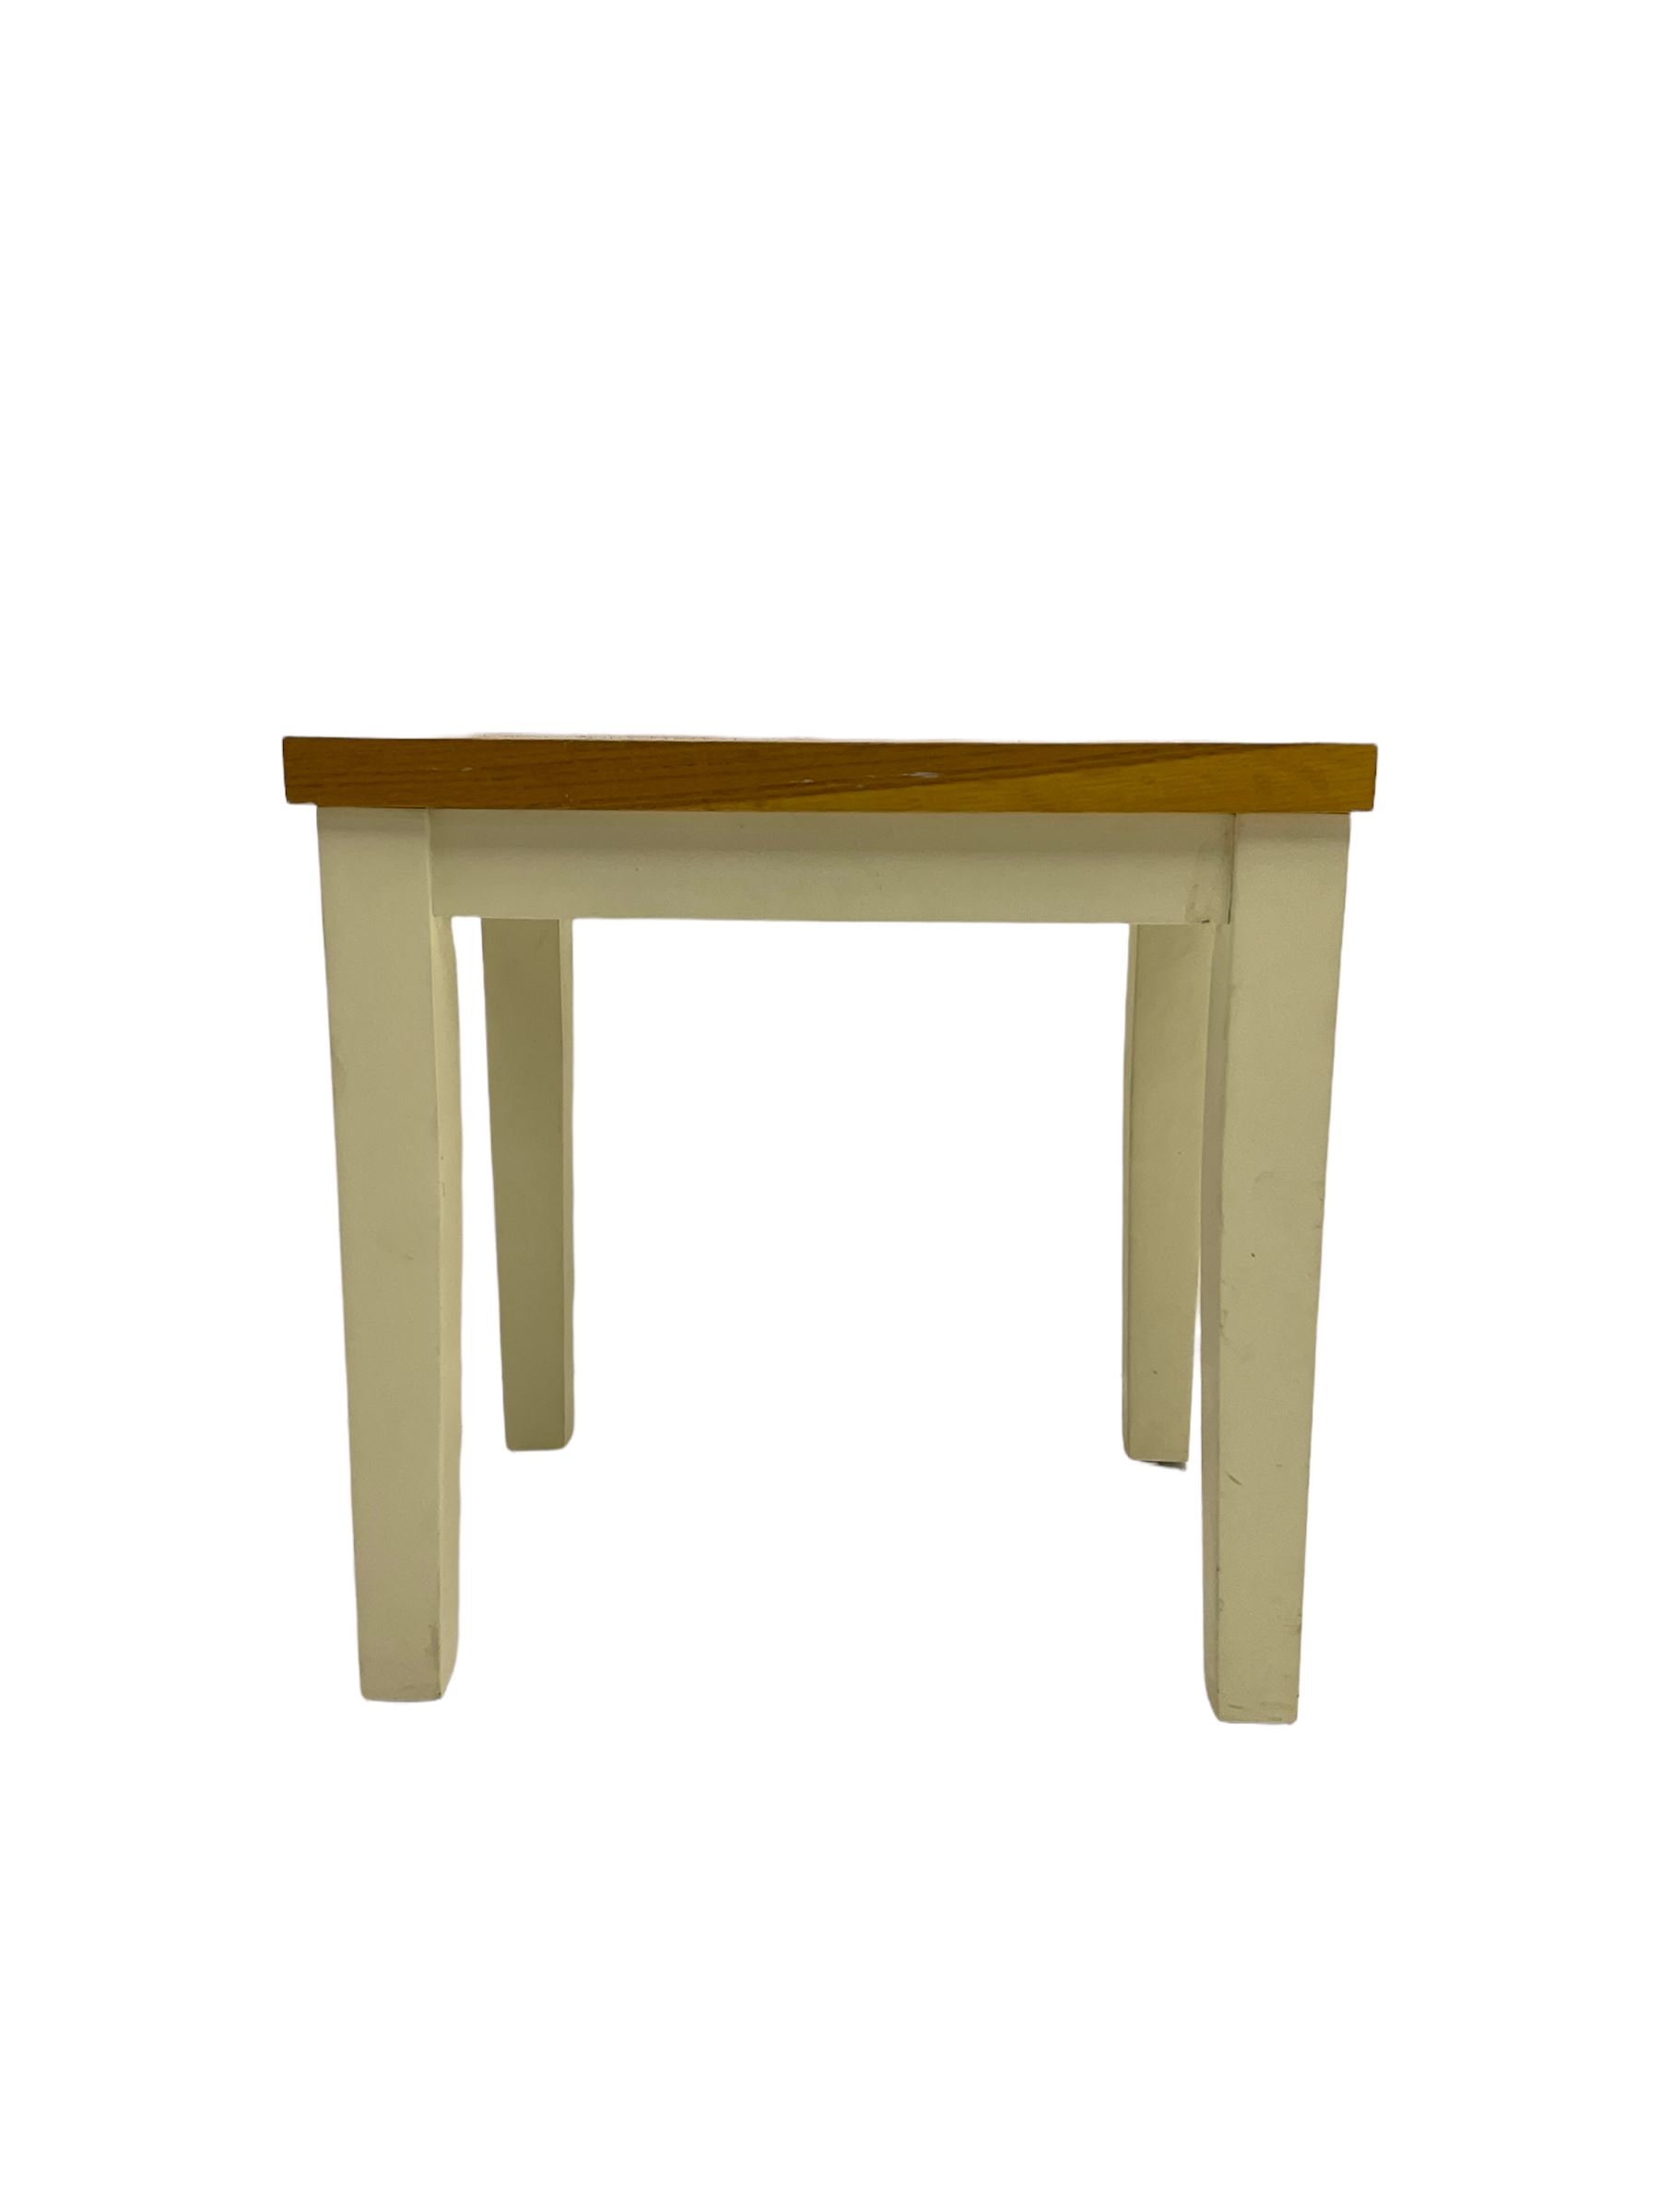 Rectangular oak top occasional table on painted base